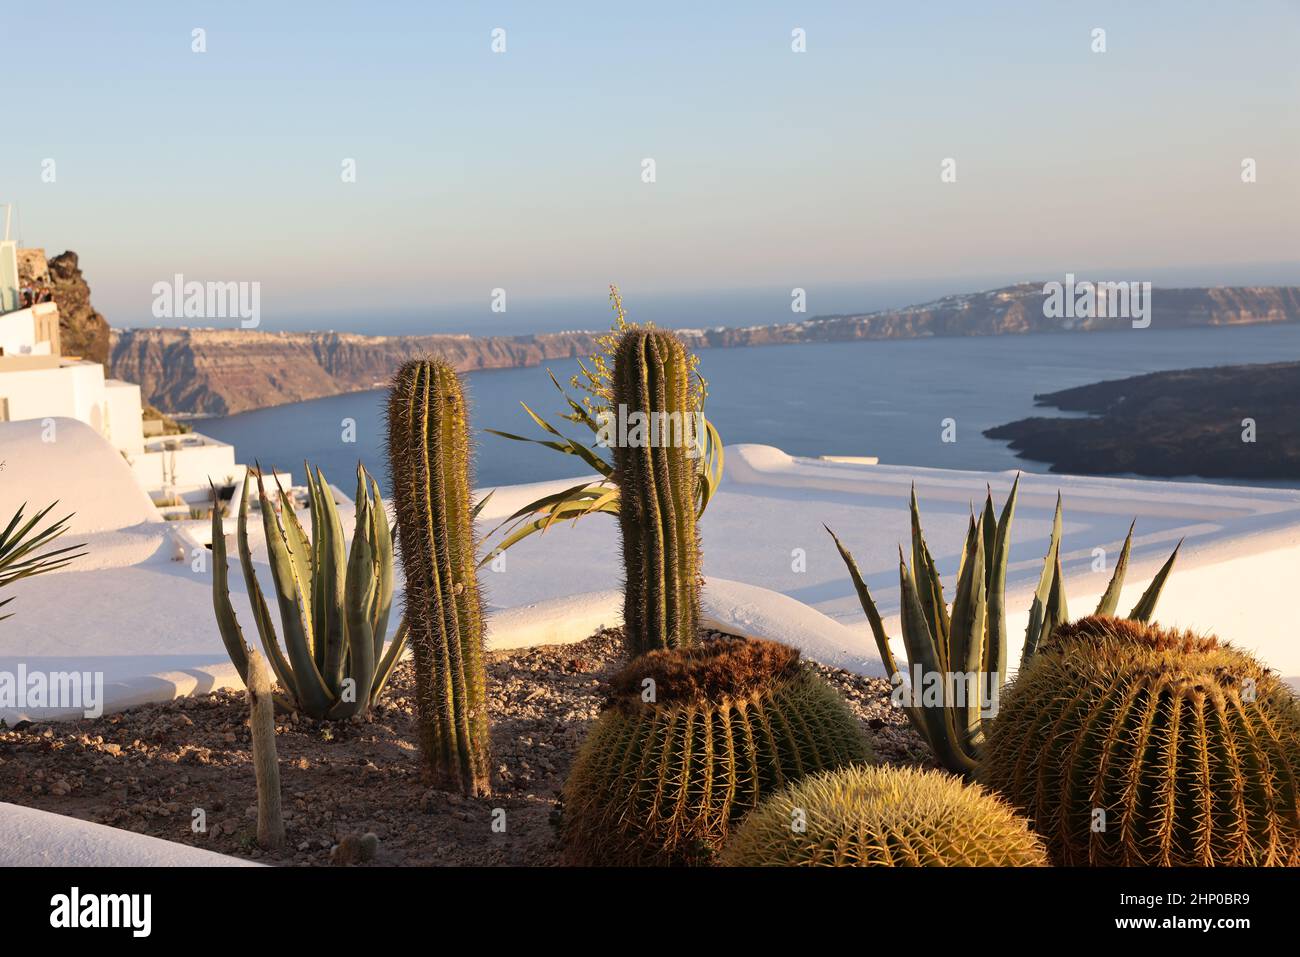 Close-up of cacti and aloes growing in a flower bed in Santorini. Caldera on background. Stock Photo